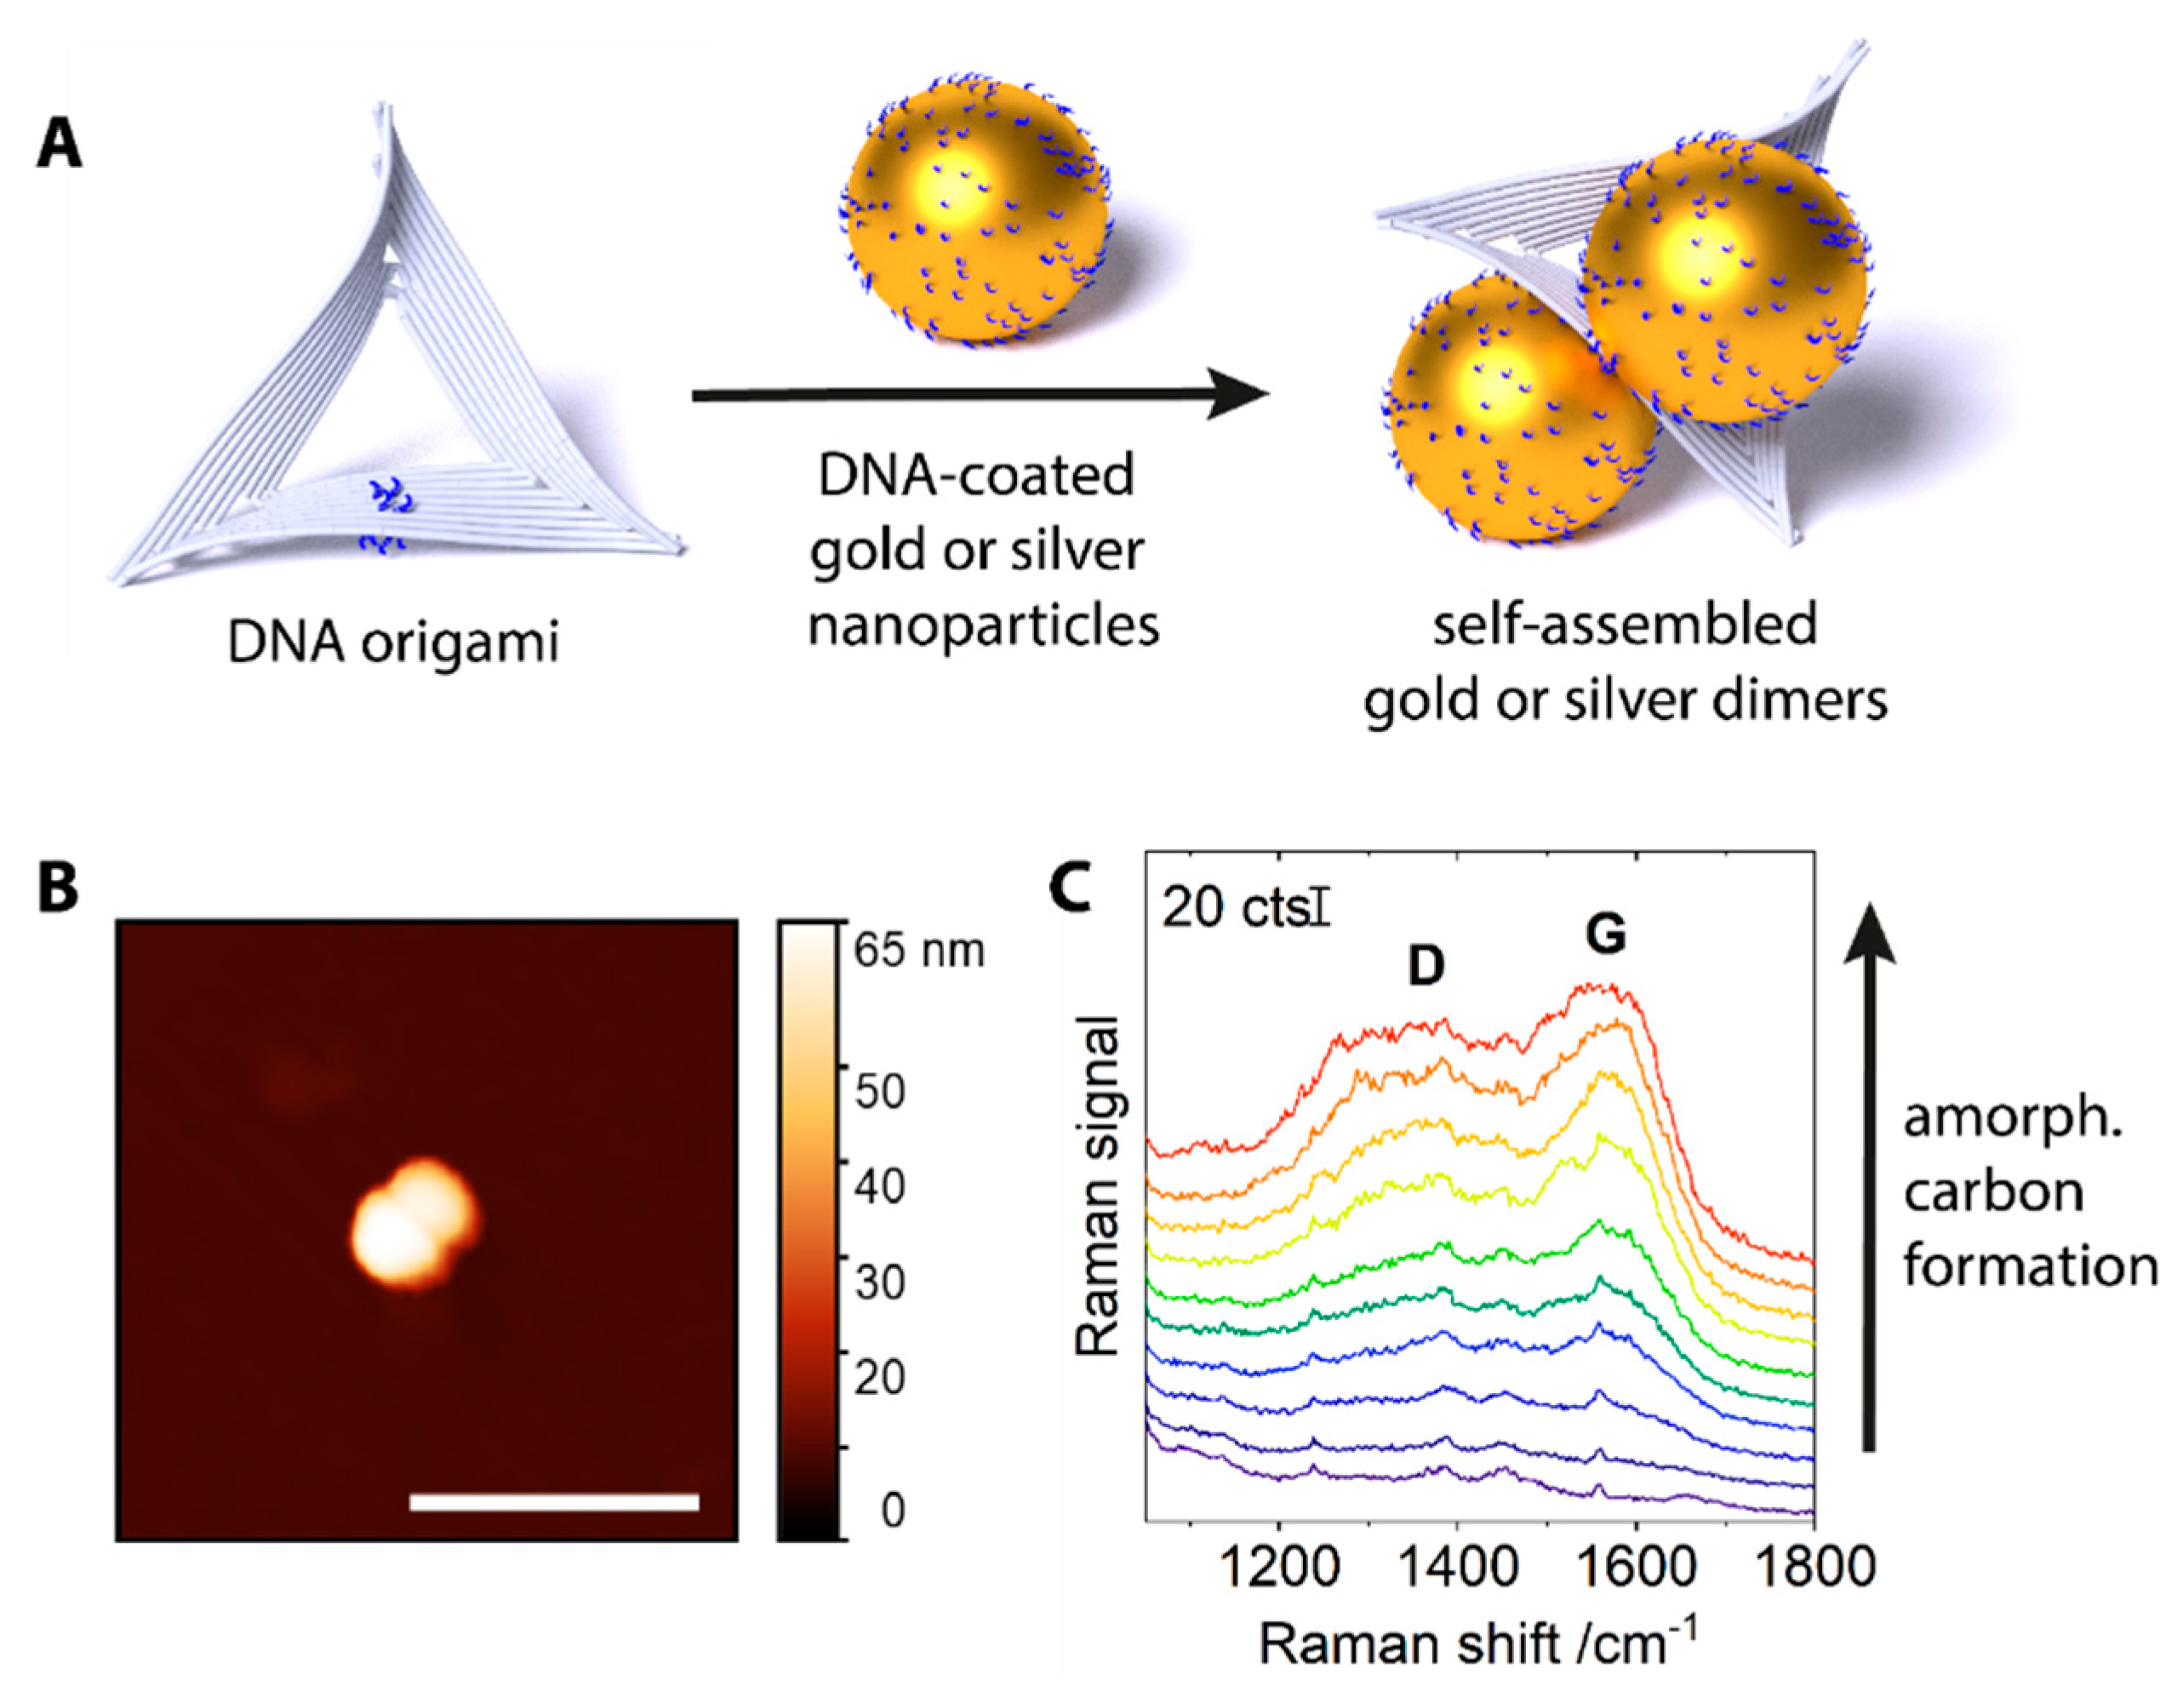 Molecules | Free Full-Text | Amorphous Carbon Generation as a  Photocatalytic Reaction on DNA-Assembled Gold and Silver Nanostructures